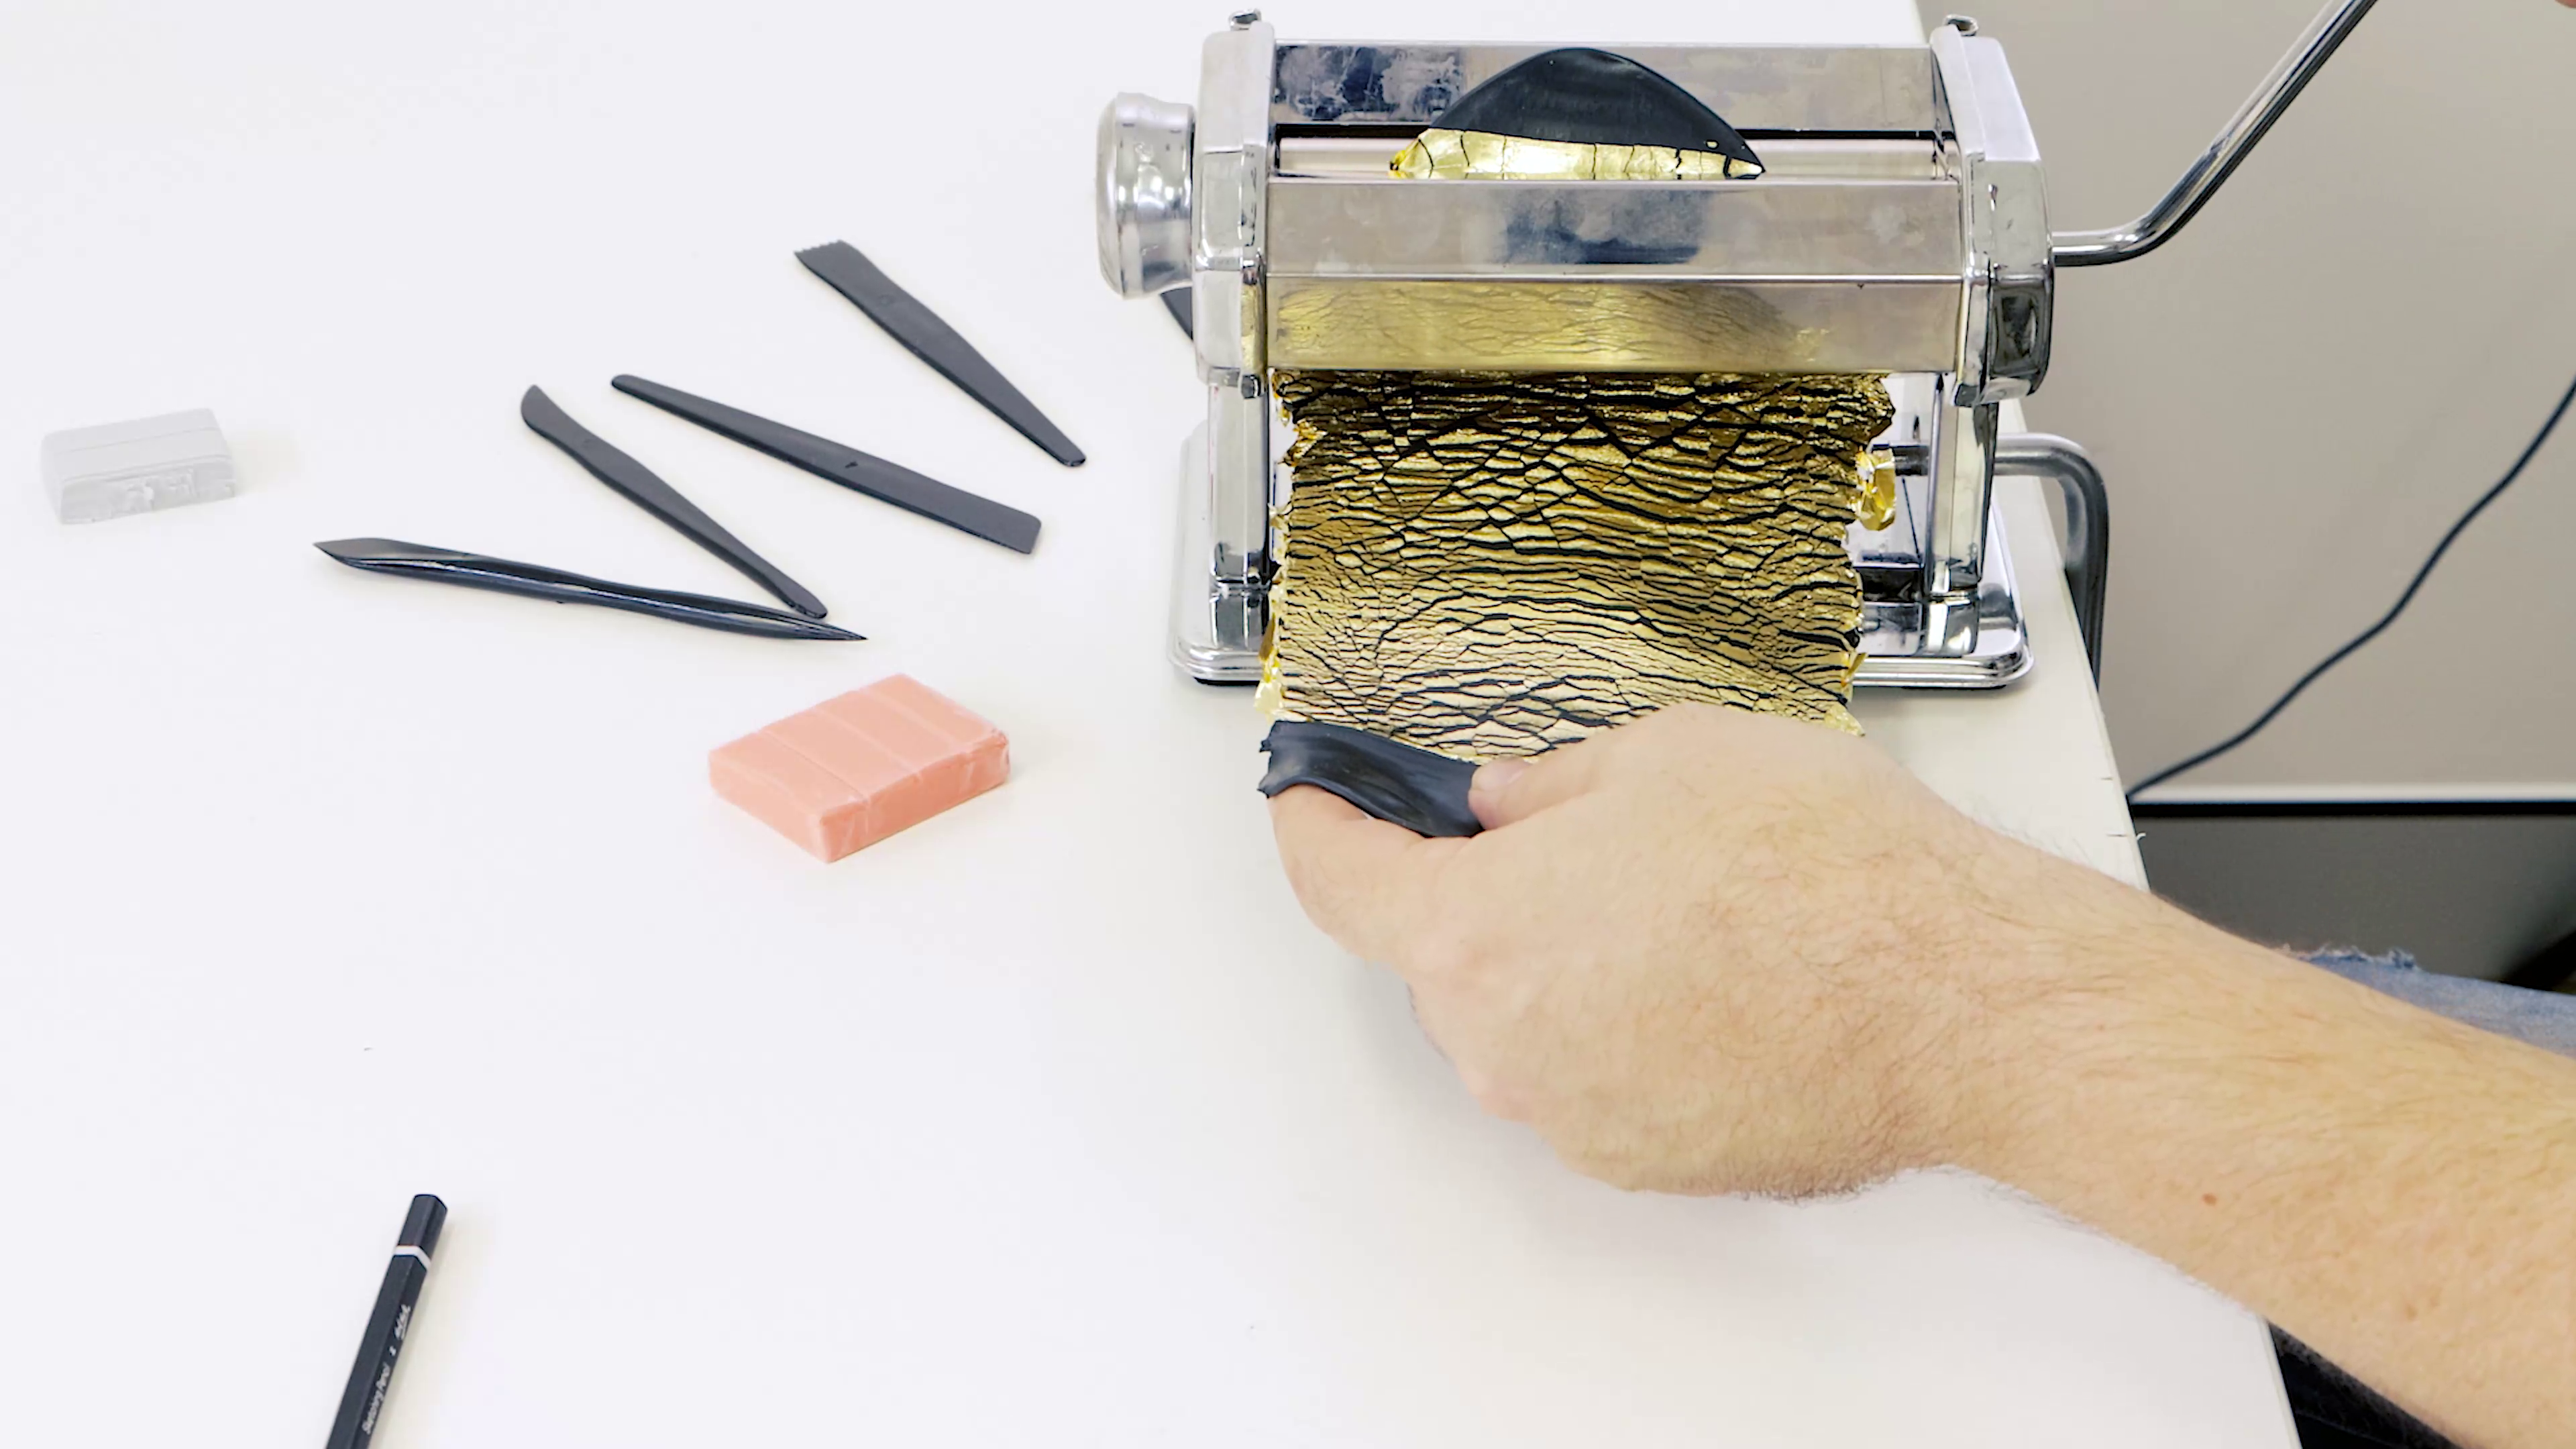 Master the Art of Using a Pasta Machine for Polymer Clay